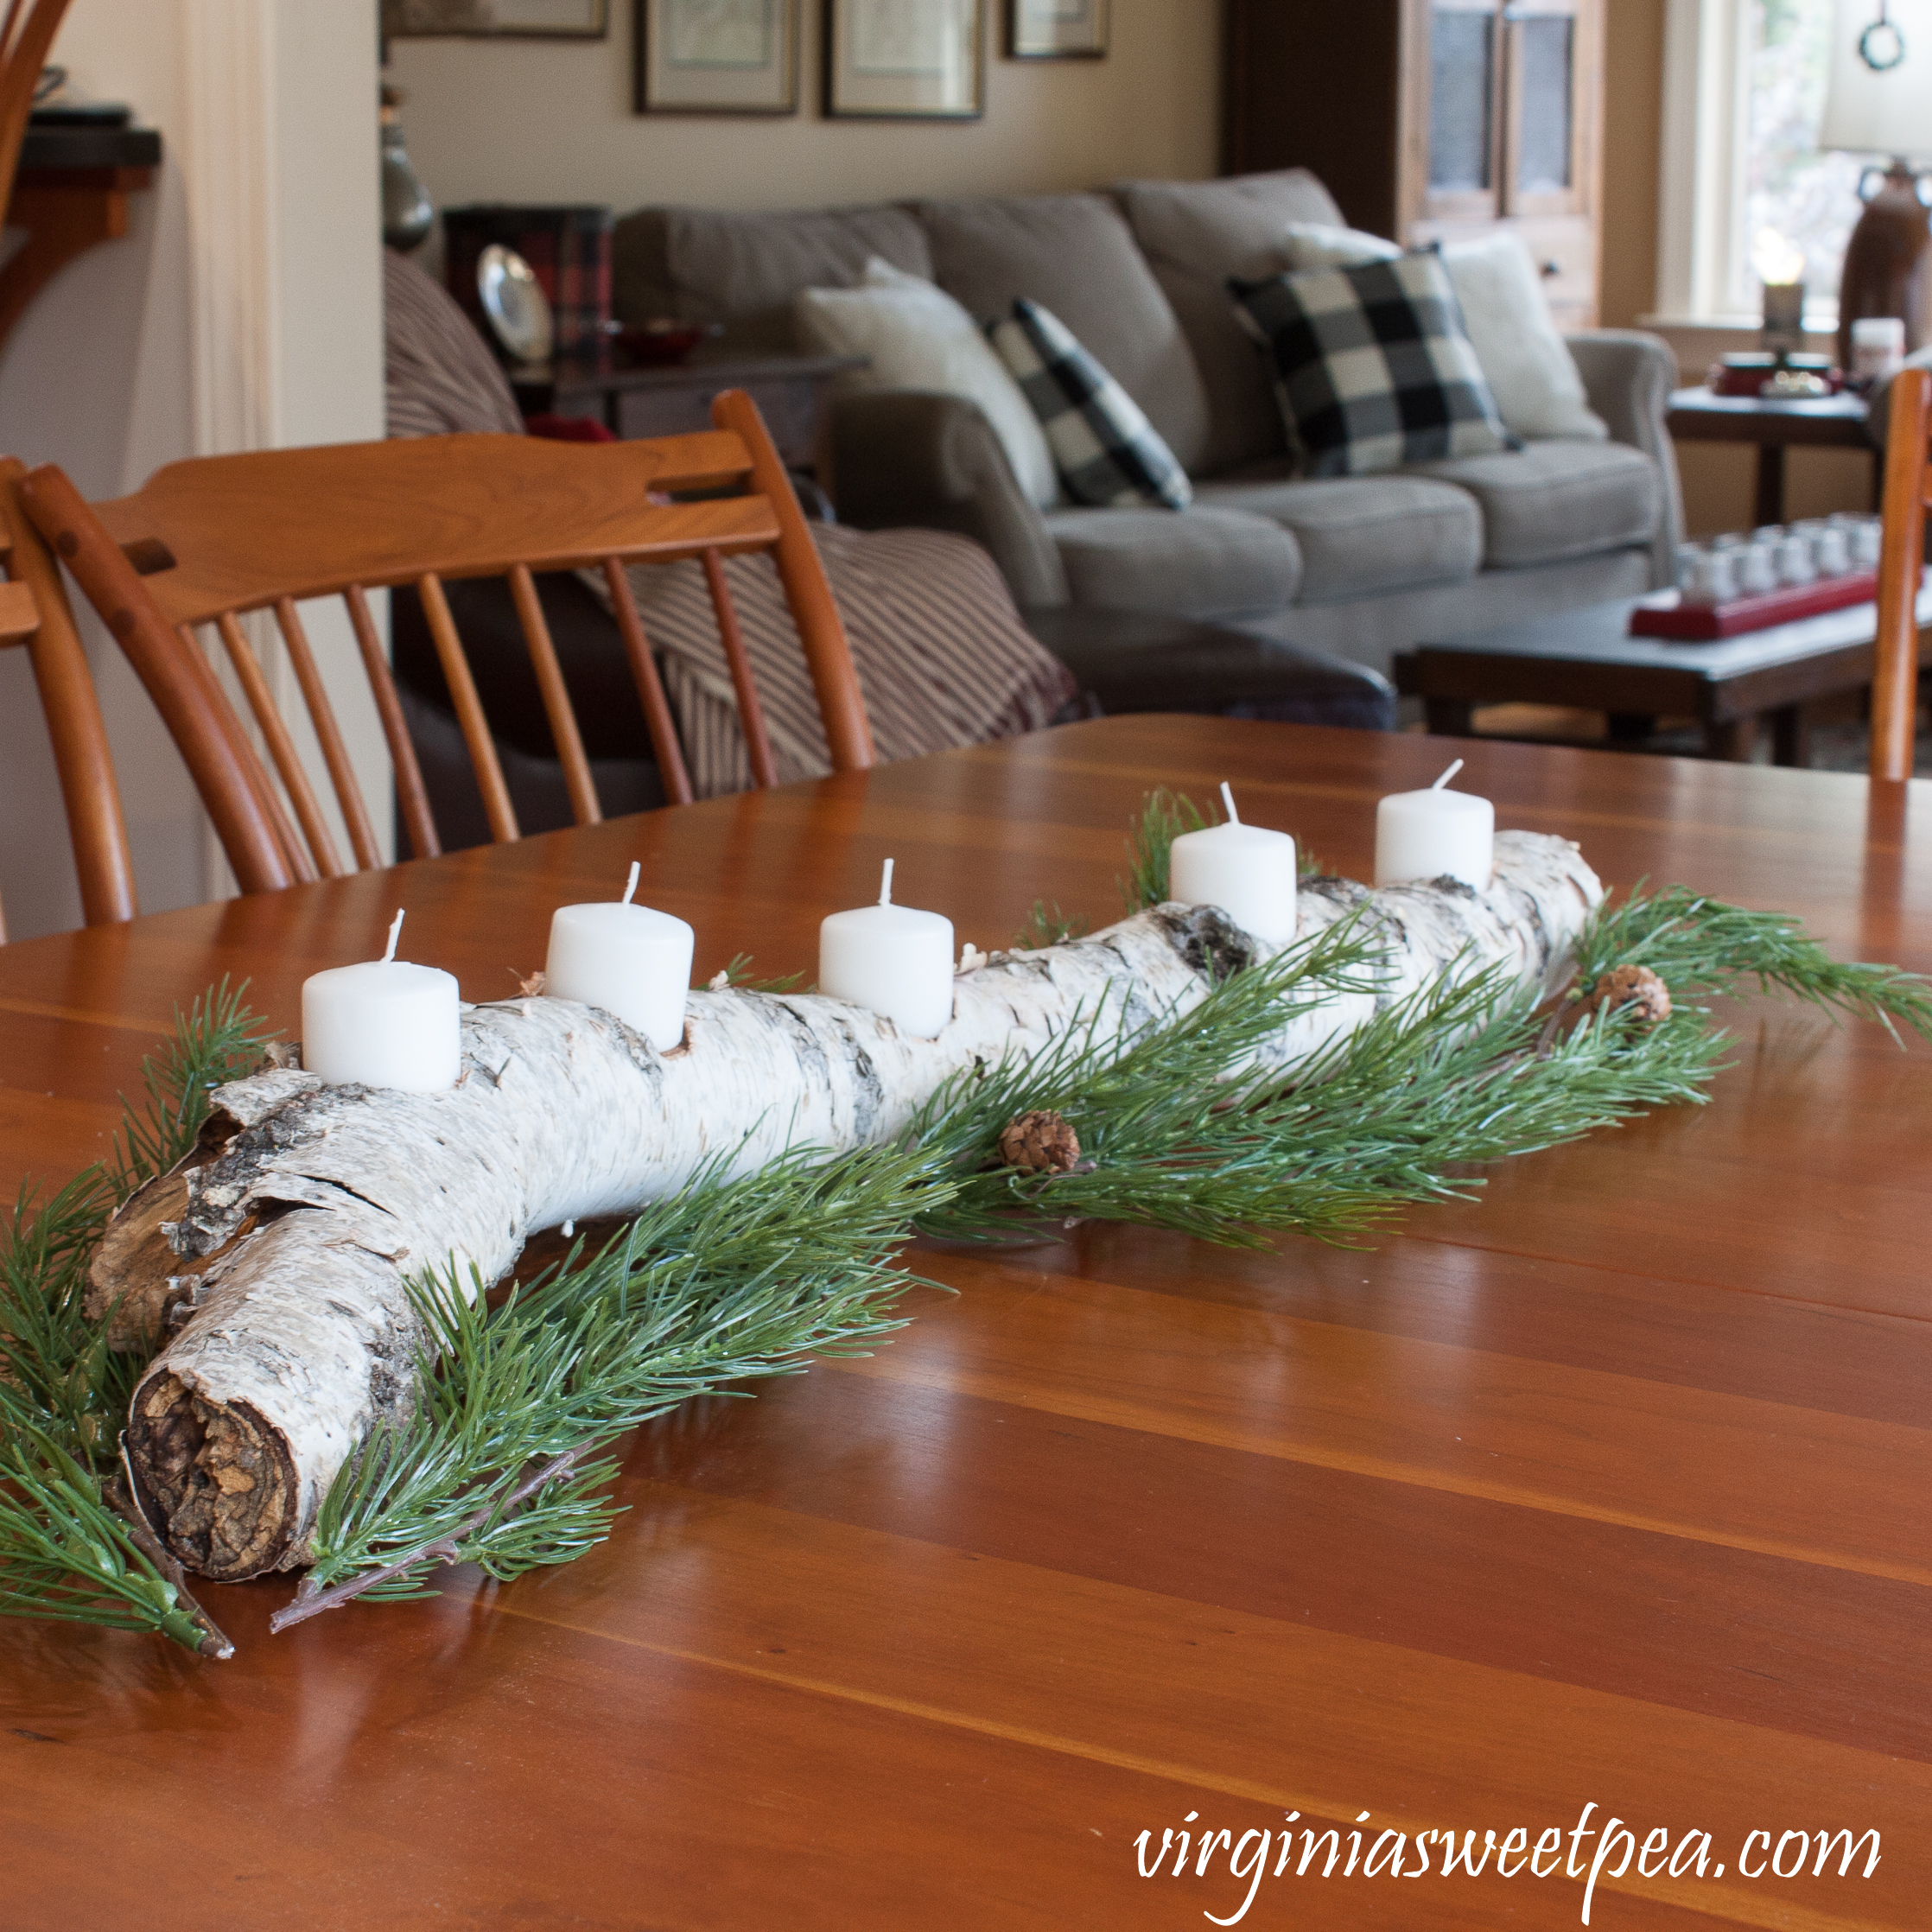 DIY Yule Log - How to Make a DIY Yule Log - Follow the step-by-step instructions to learn how to make a yule log for your home. #diy #yulelog #diyyulelog #woodworking